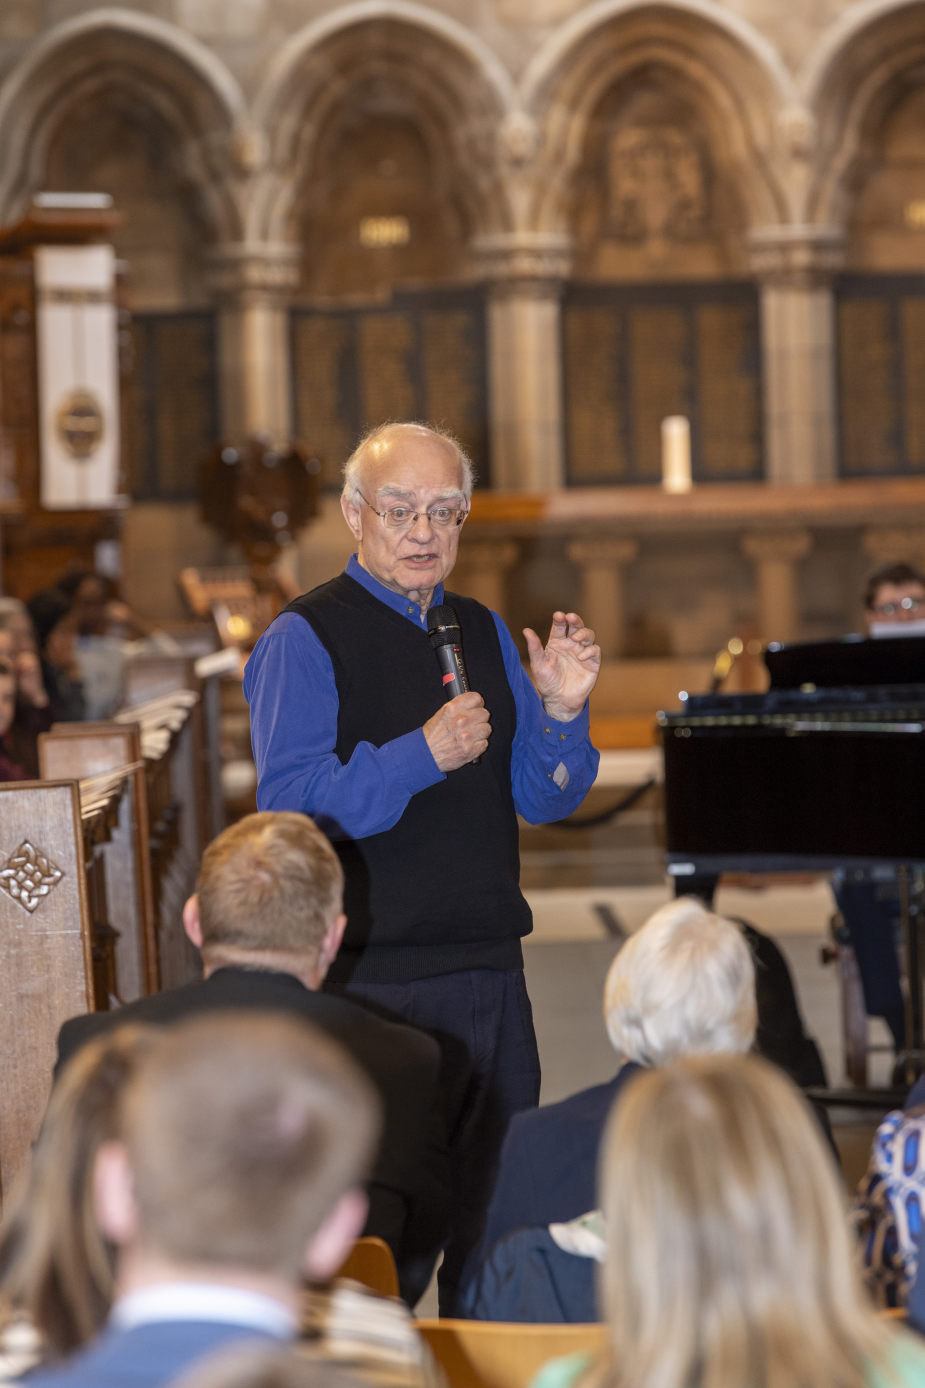 John Rutter speaking with the audience